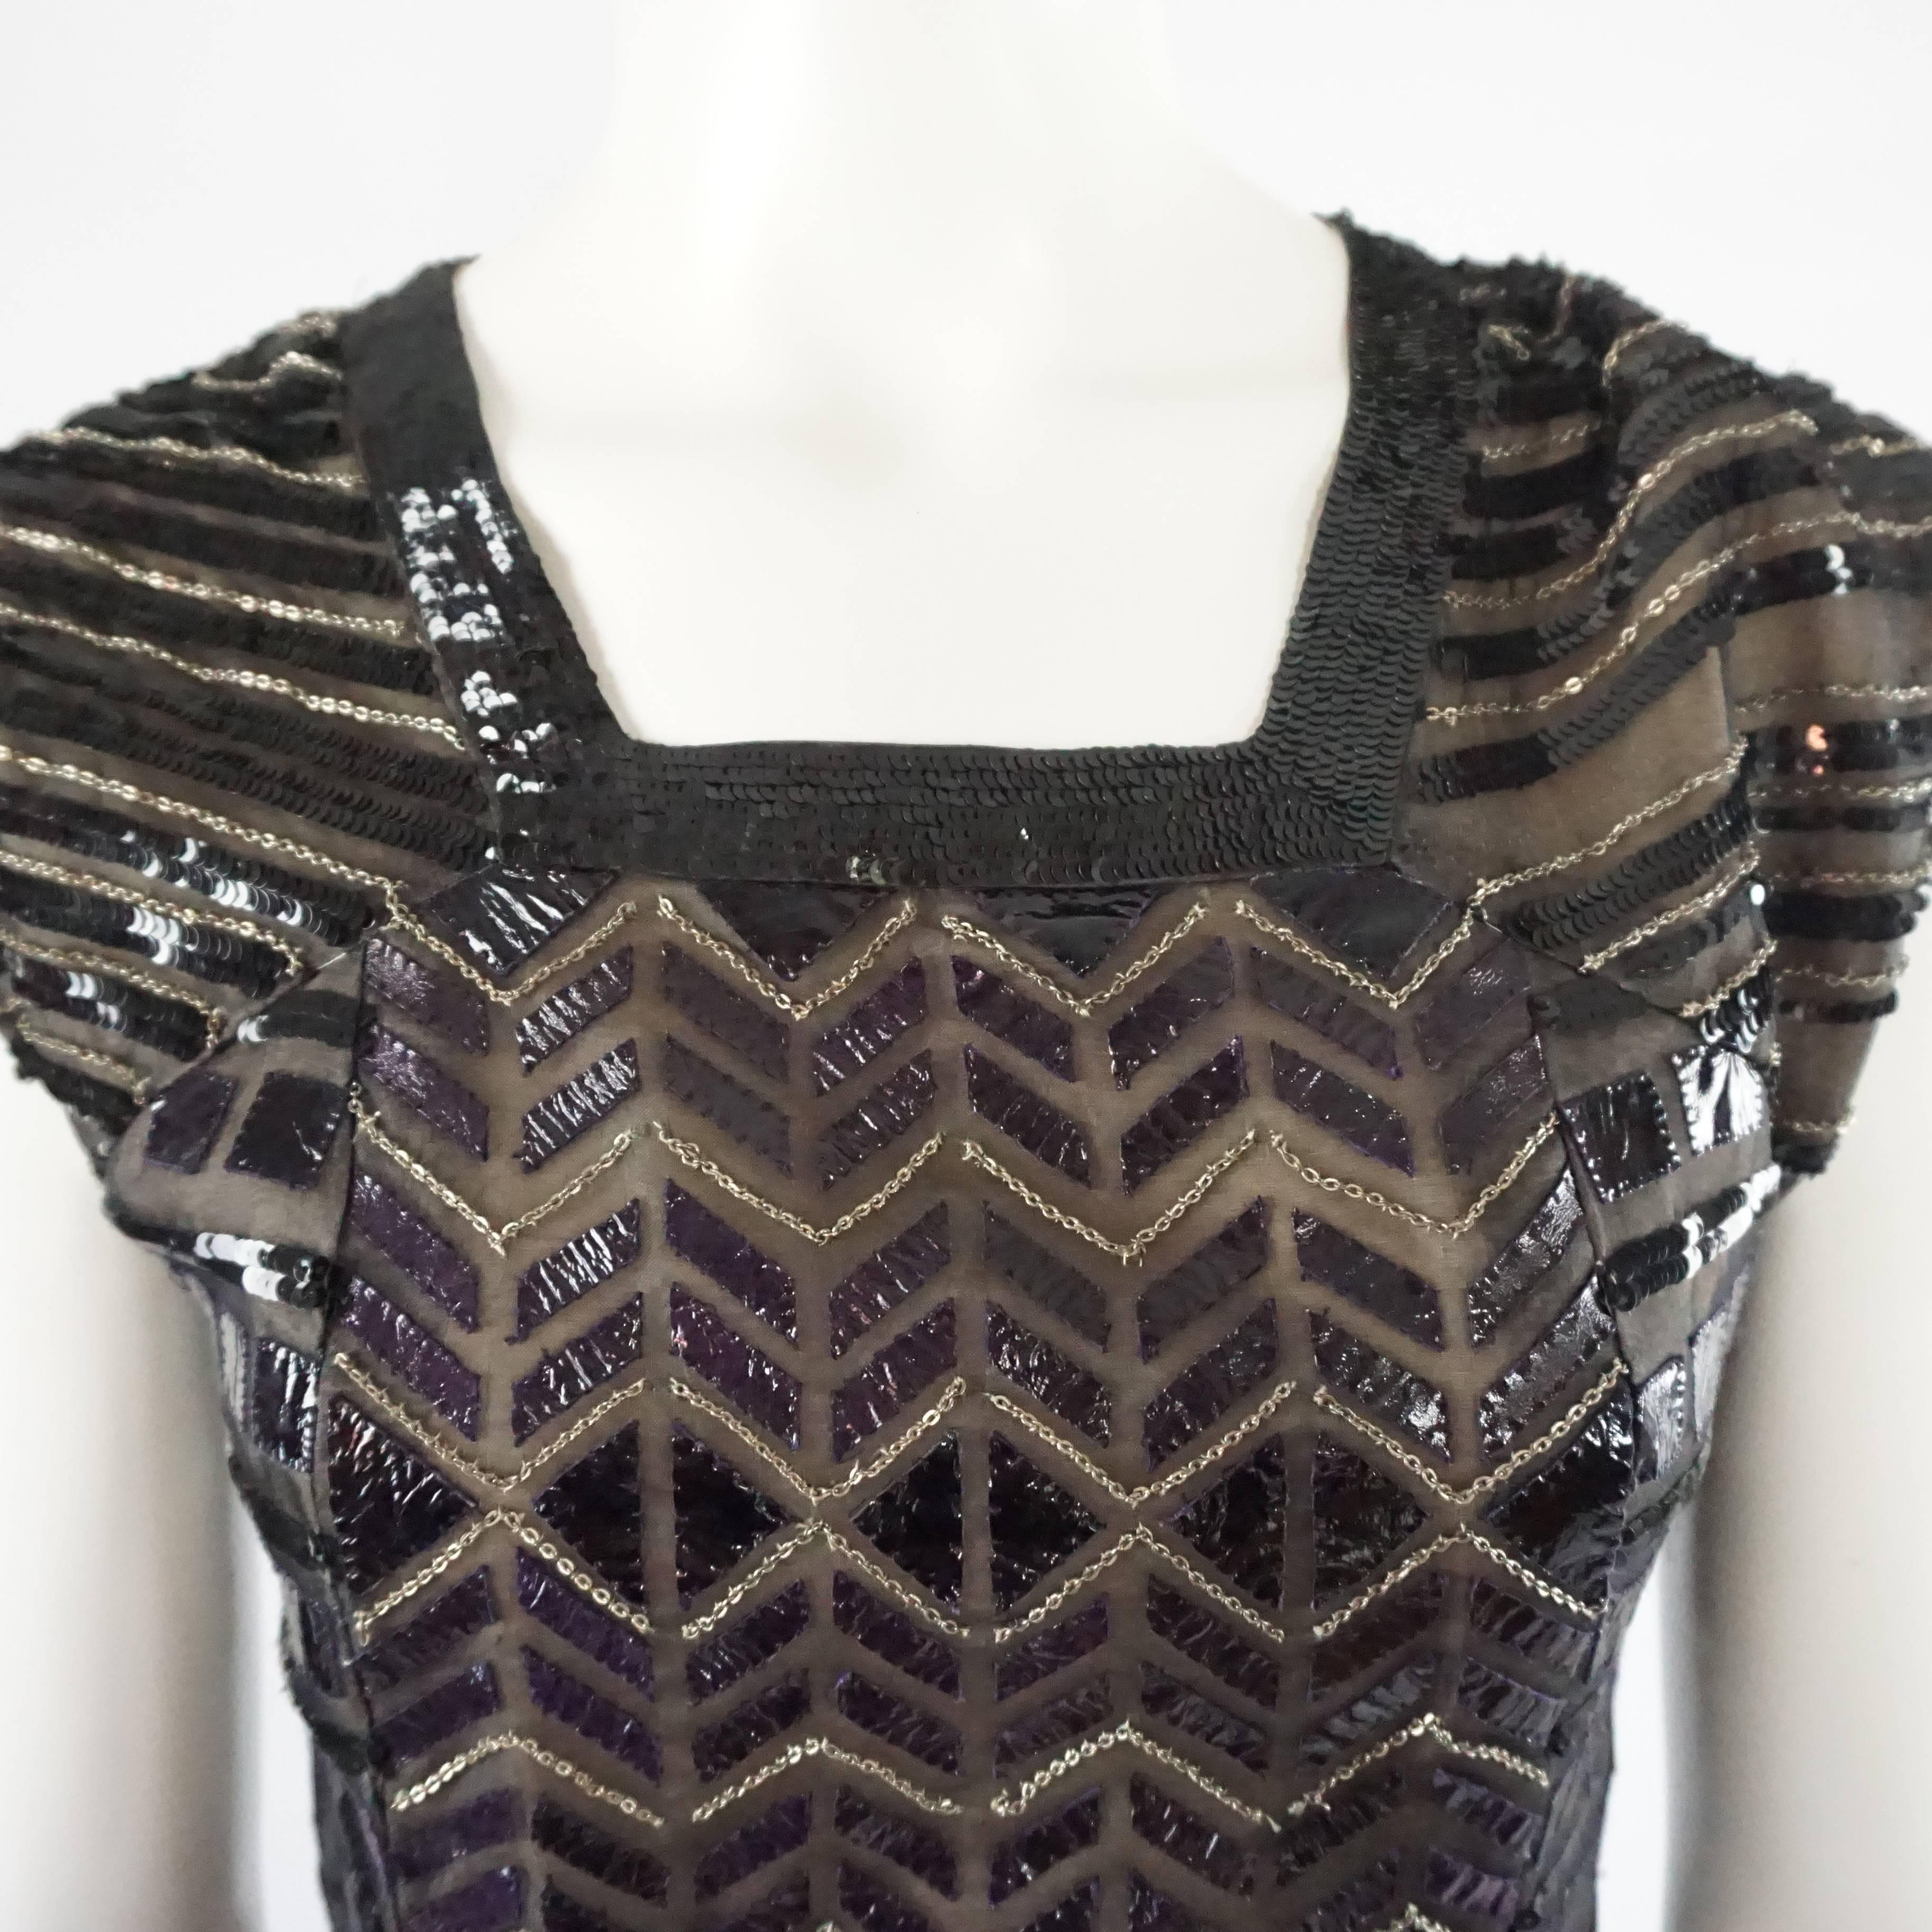 Oscar de la Renta Black and Brown Sequin and Leather Applique Dress - M In Excellent Condition For Sale In West Palm Beach, FL